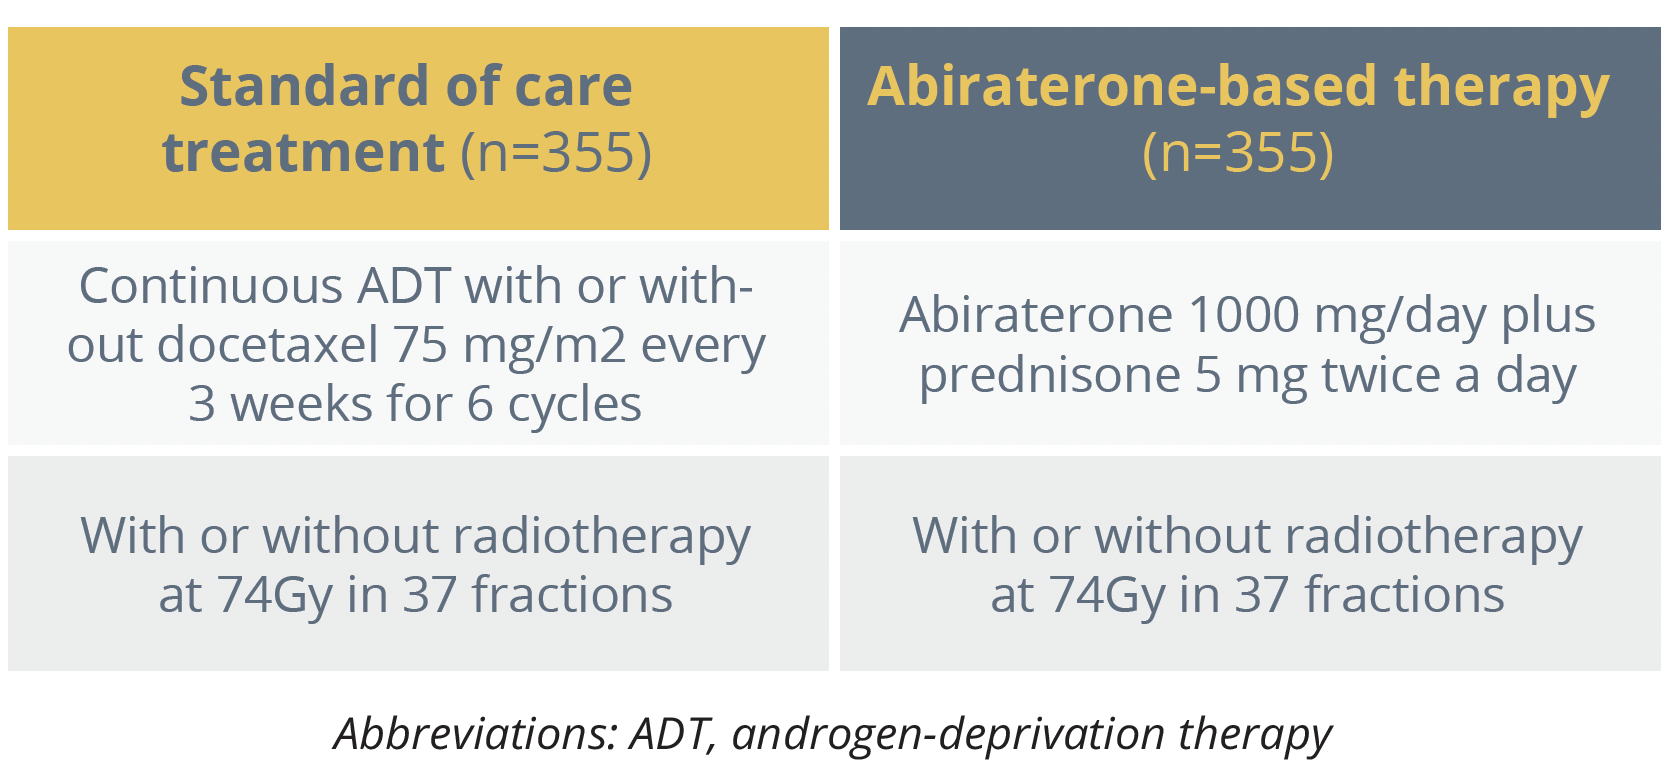 Participants were randomly assigned to standard of care or additional abiraterone-based therapy